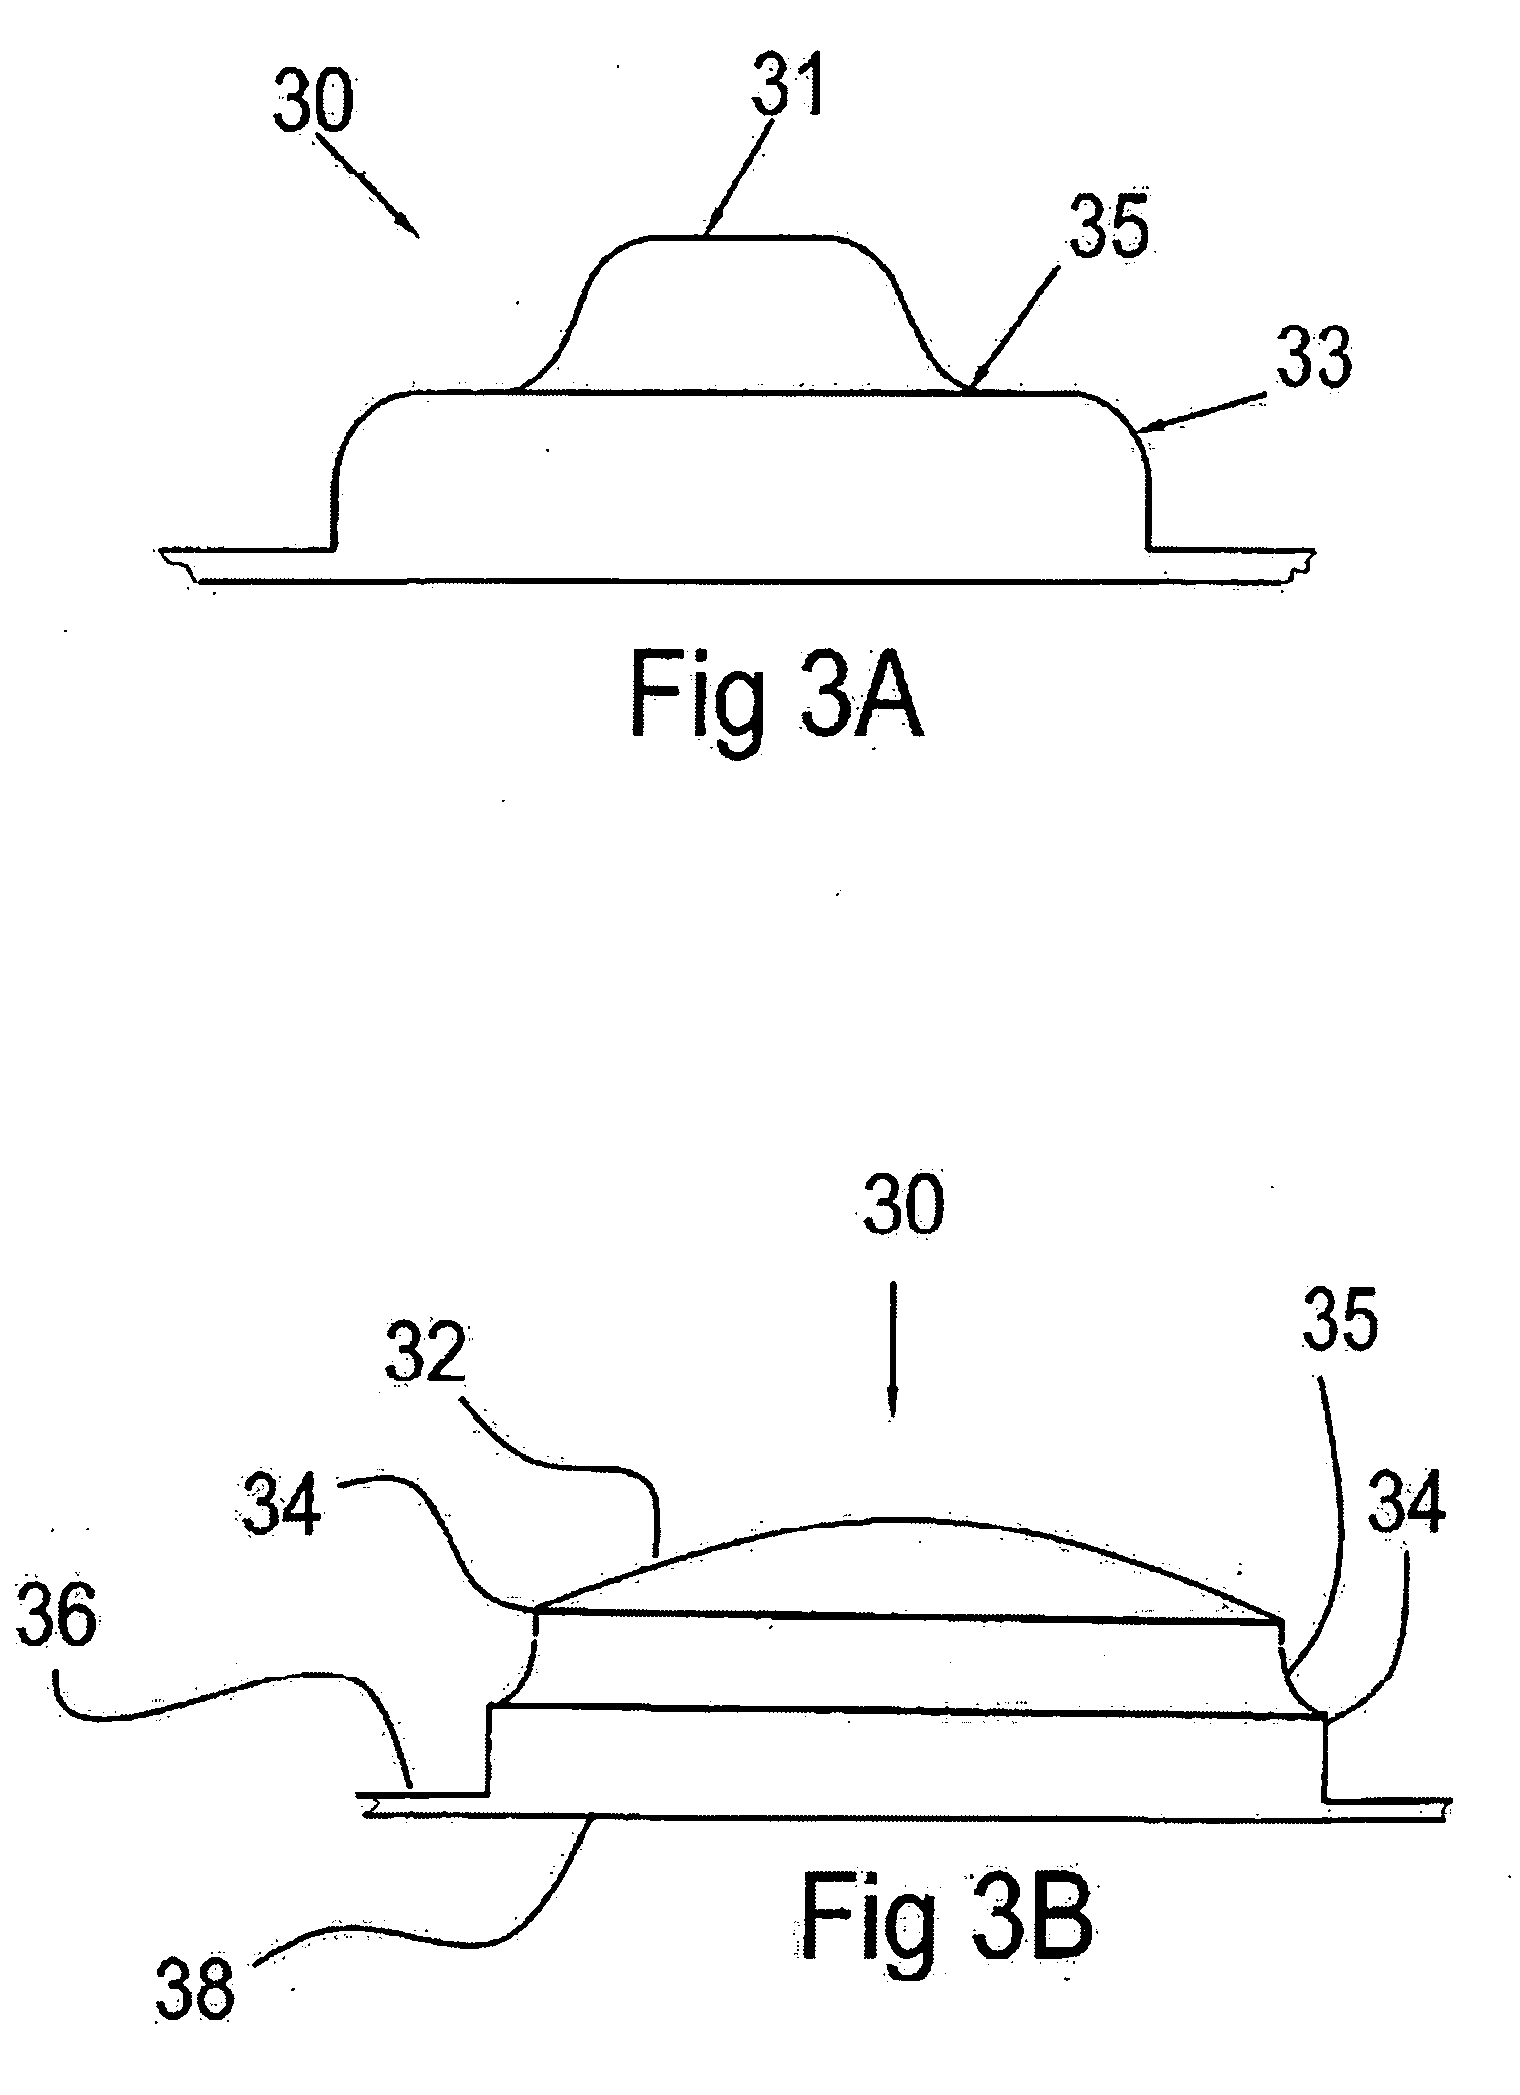 Medication record system and method